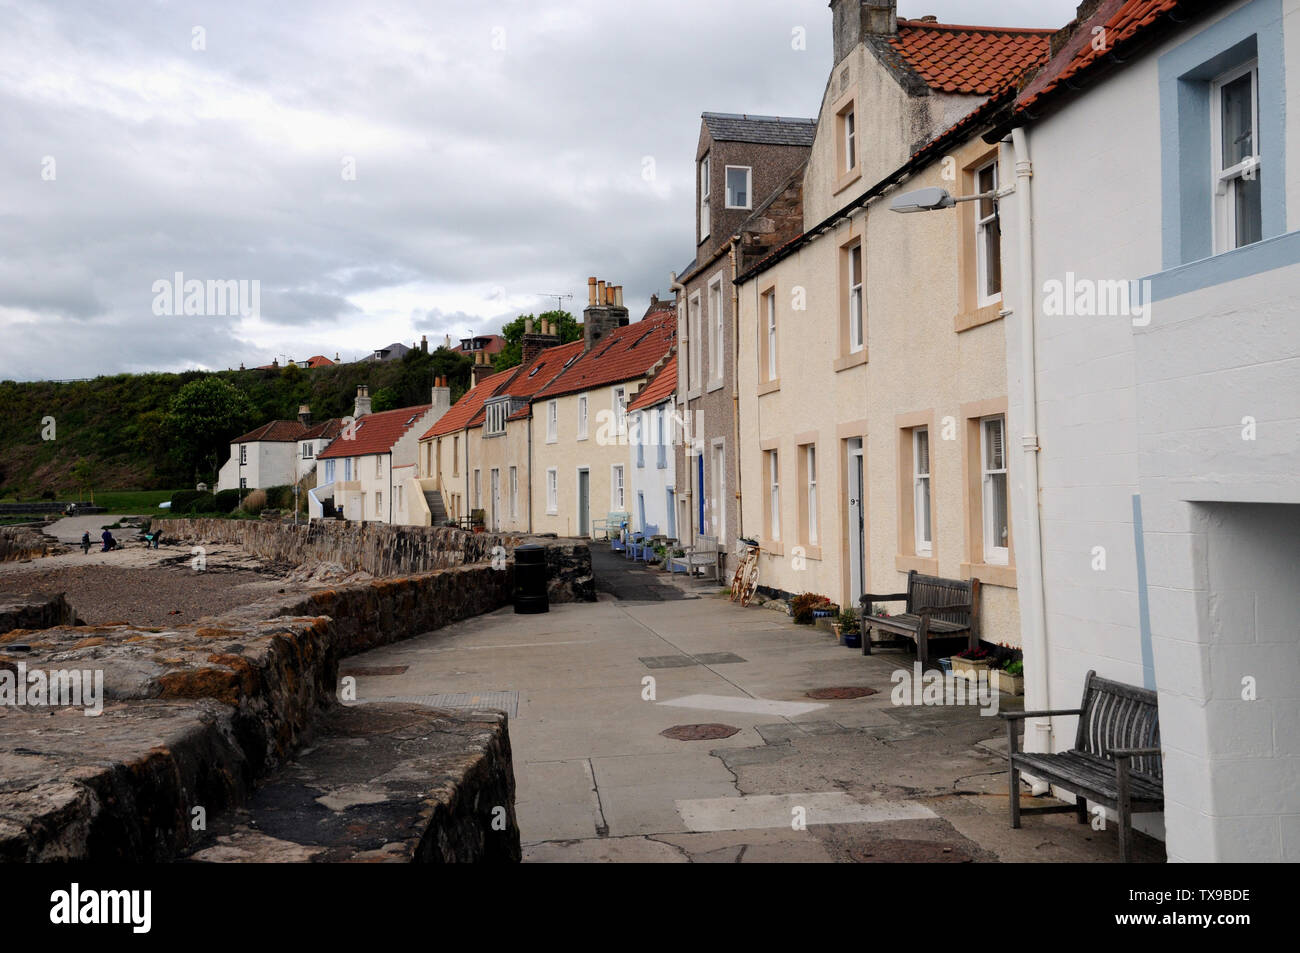 Cottages At The Scottish Seaside Village Of Pittenweem In Fife